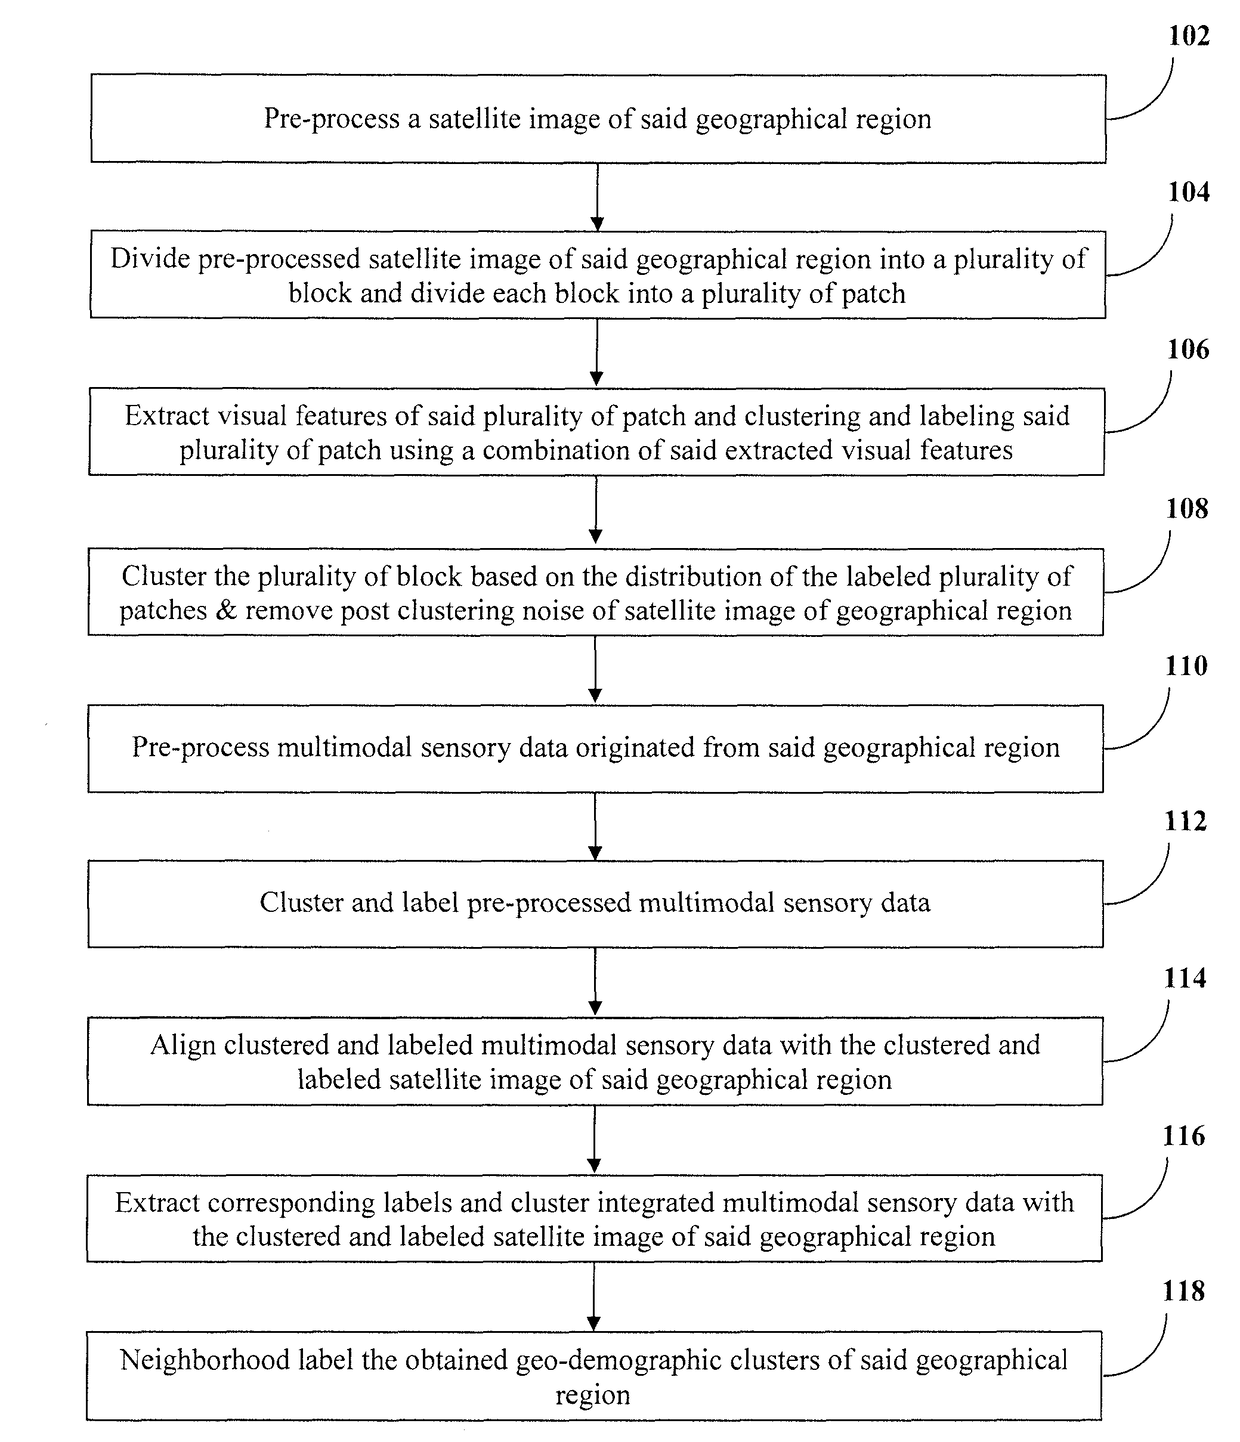 Method and system for geo-demographic classification of a geographical region